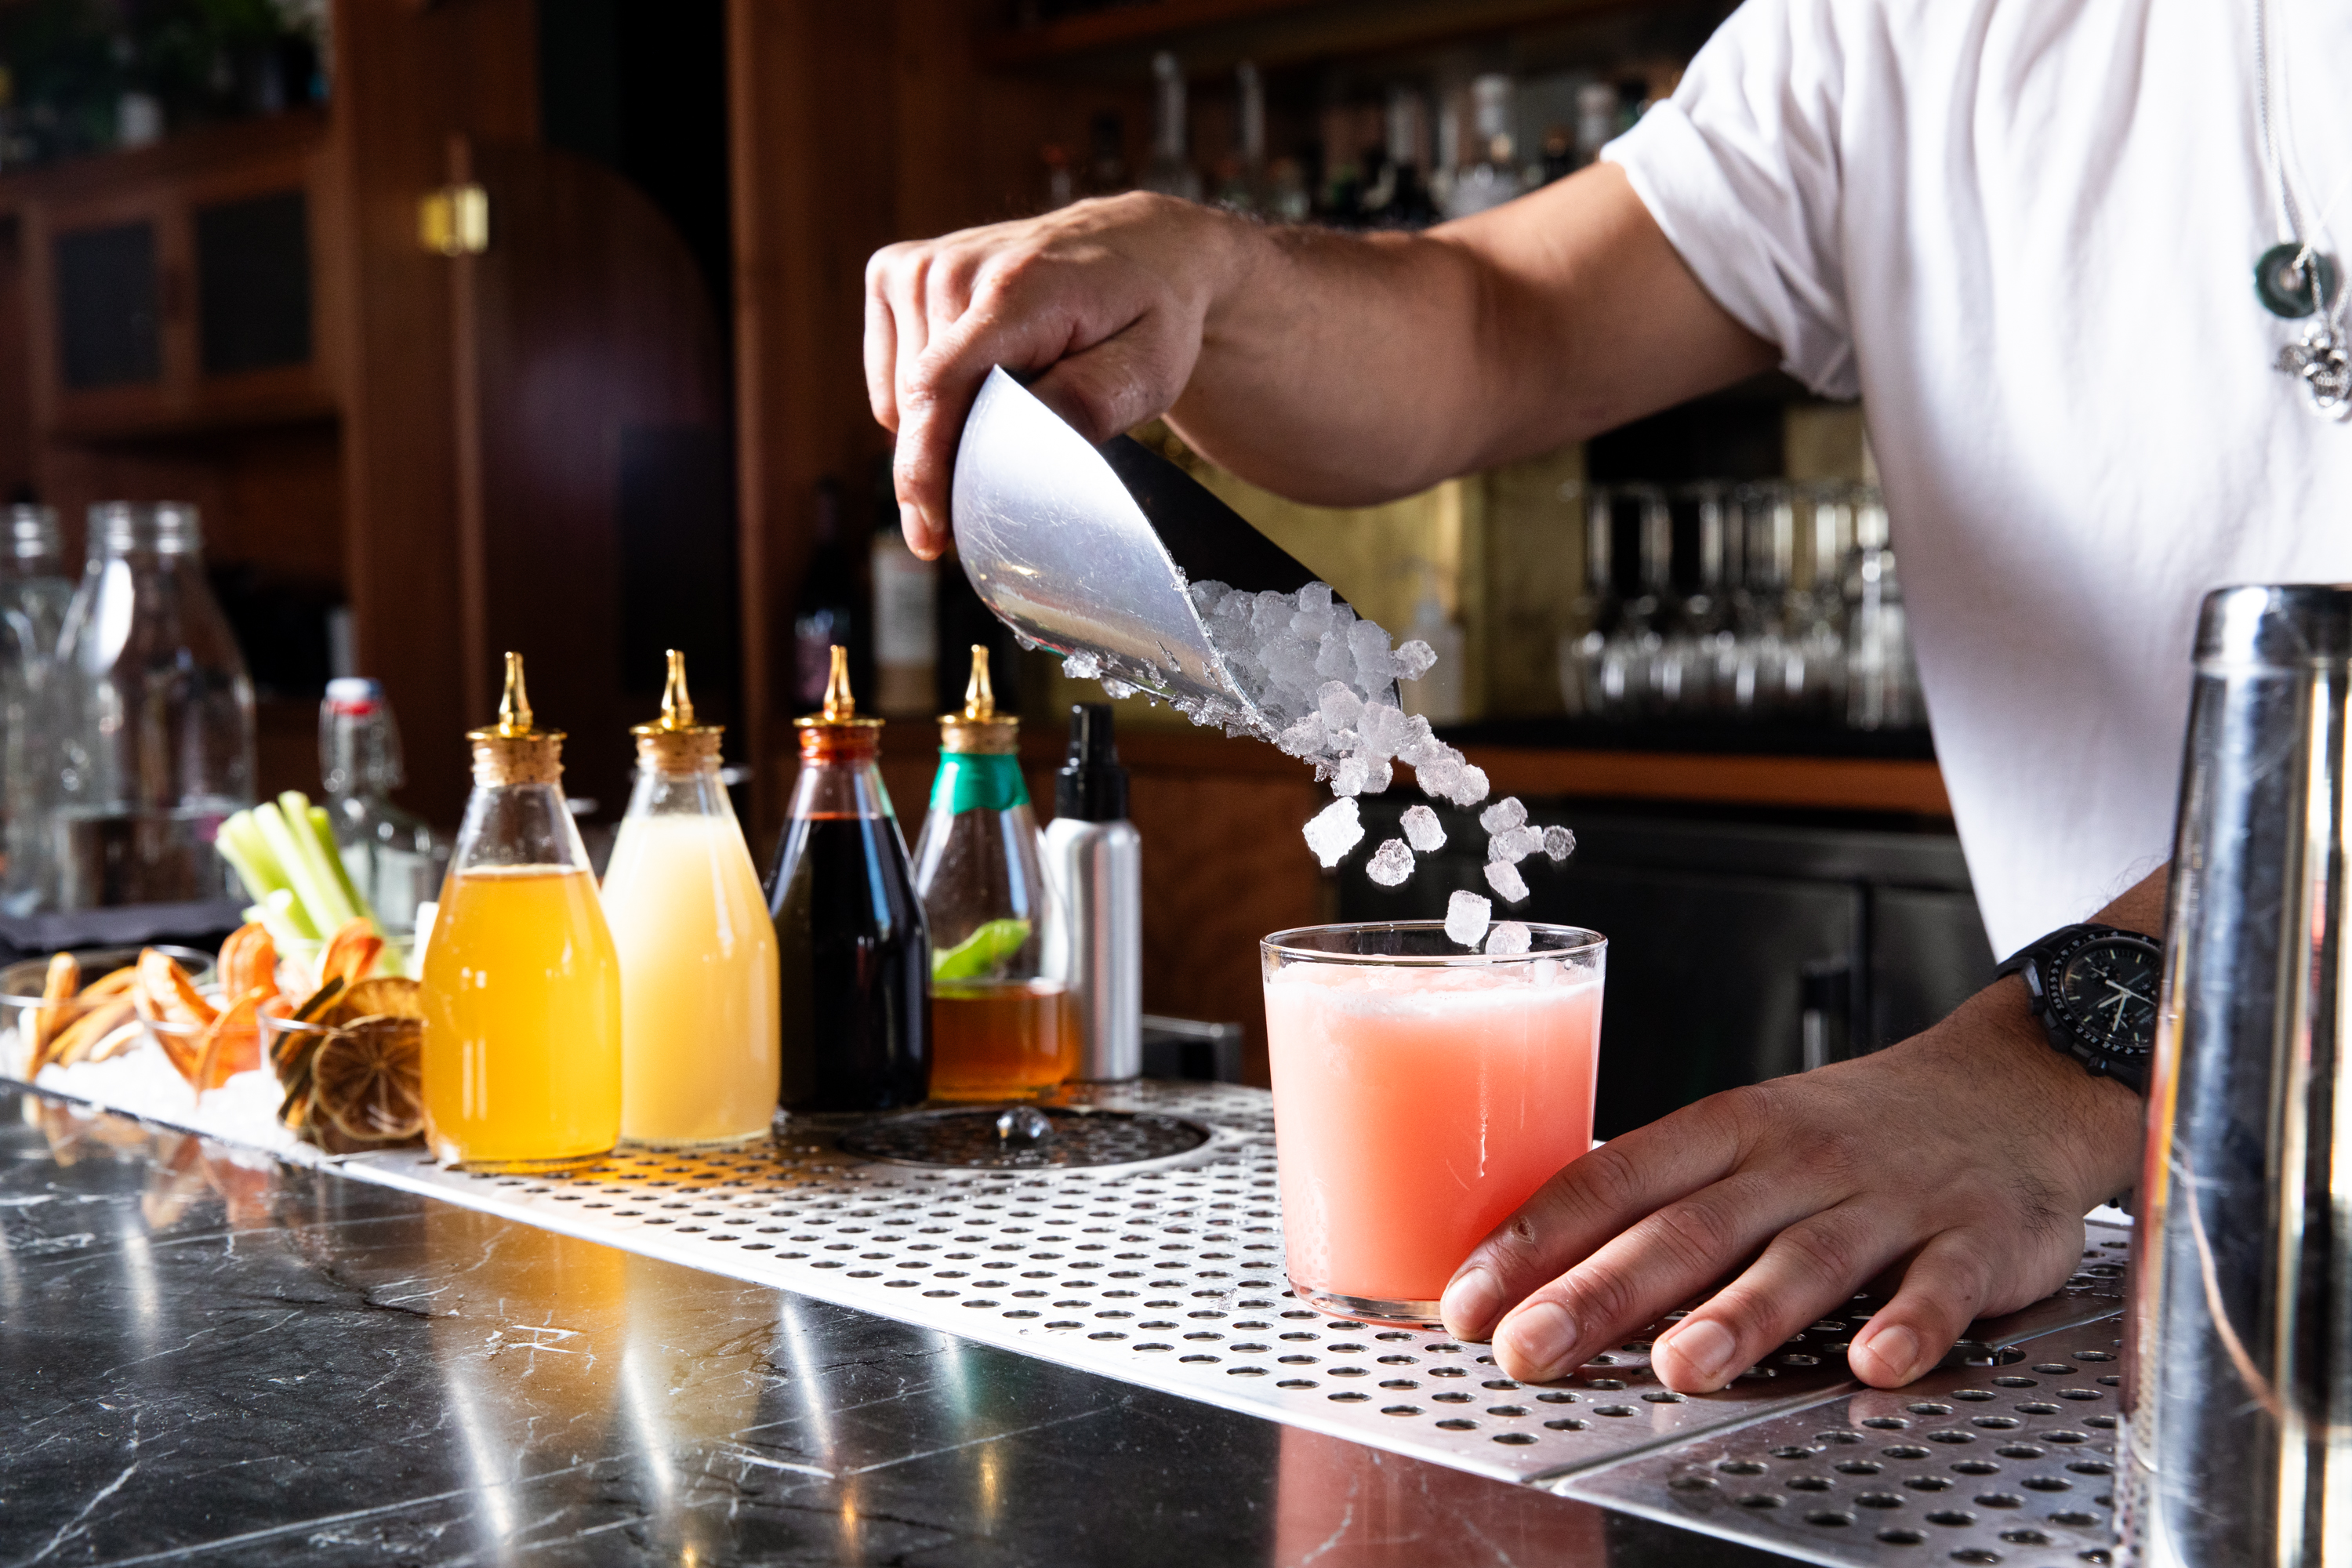 A bartender in a white shirt pours ice into a pink drink using a metal scoop. In the foreground are various syrups and colorful garnishes on the bar.